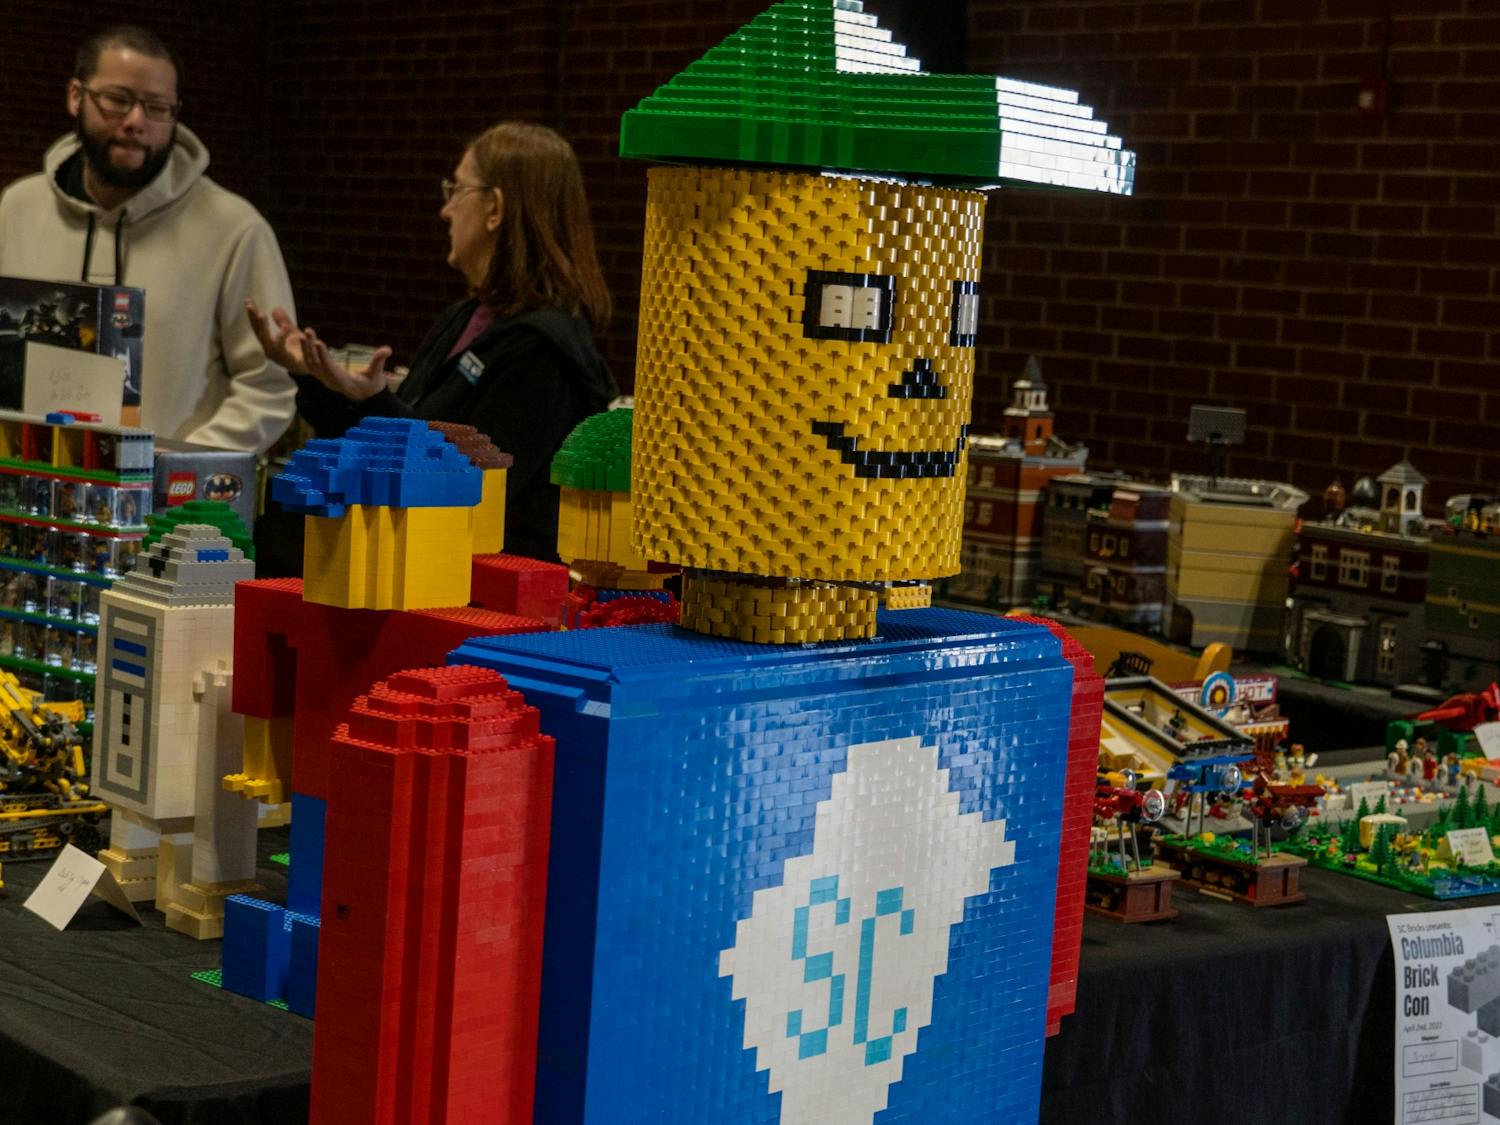 Columbia residents gathered for a Lego centered charity event held by SC Bricks on April 2, 2022. SC Bricks, a SC adult Lego fan group, showcased and sold Lego creations to help raise money for the Epworth's Children's Home.